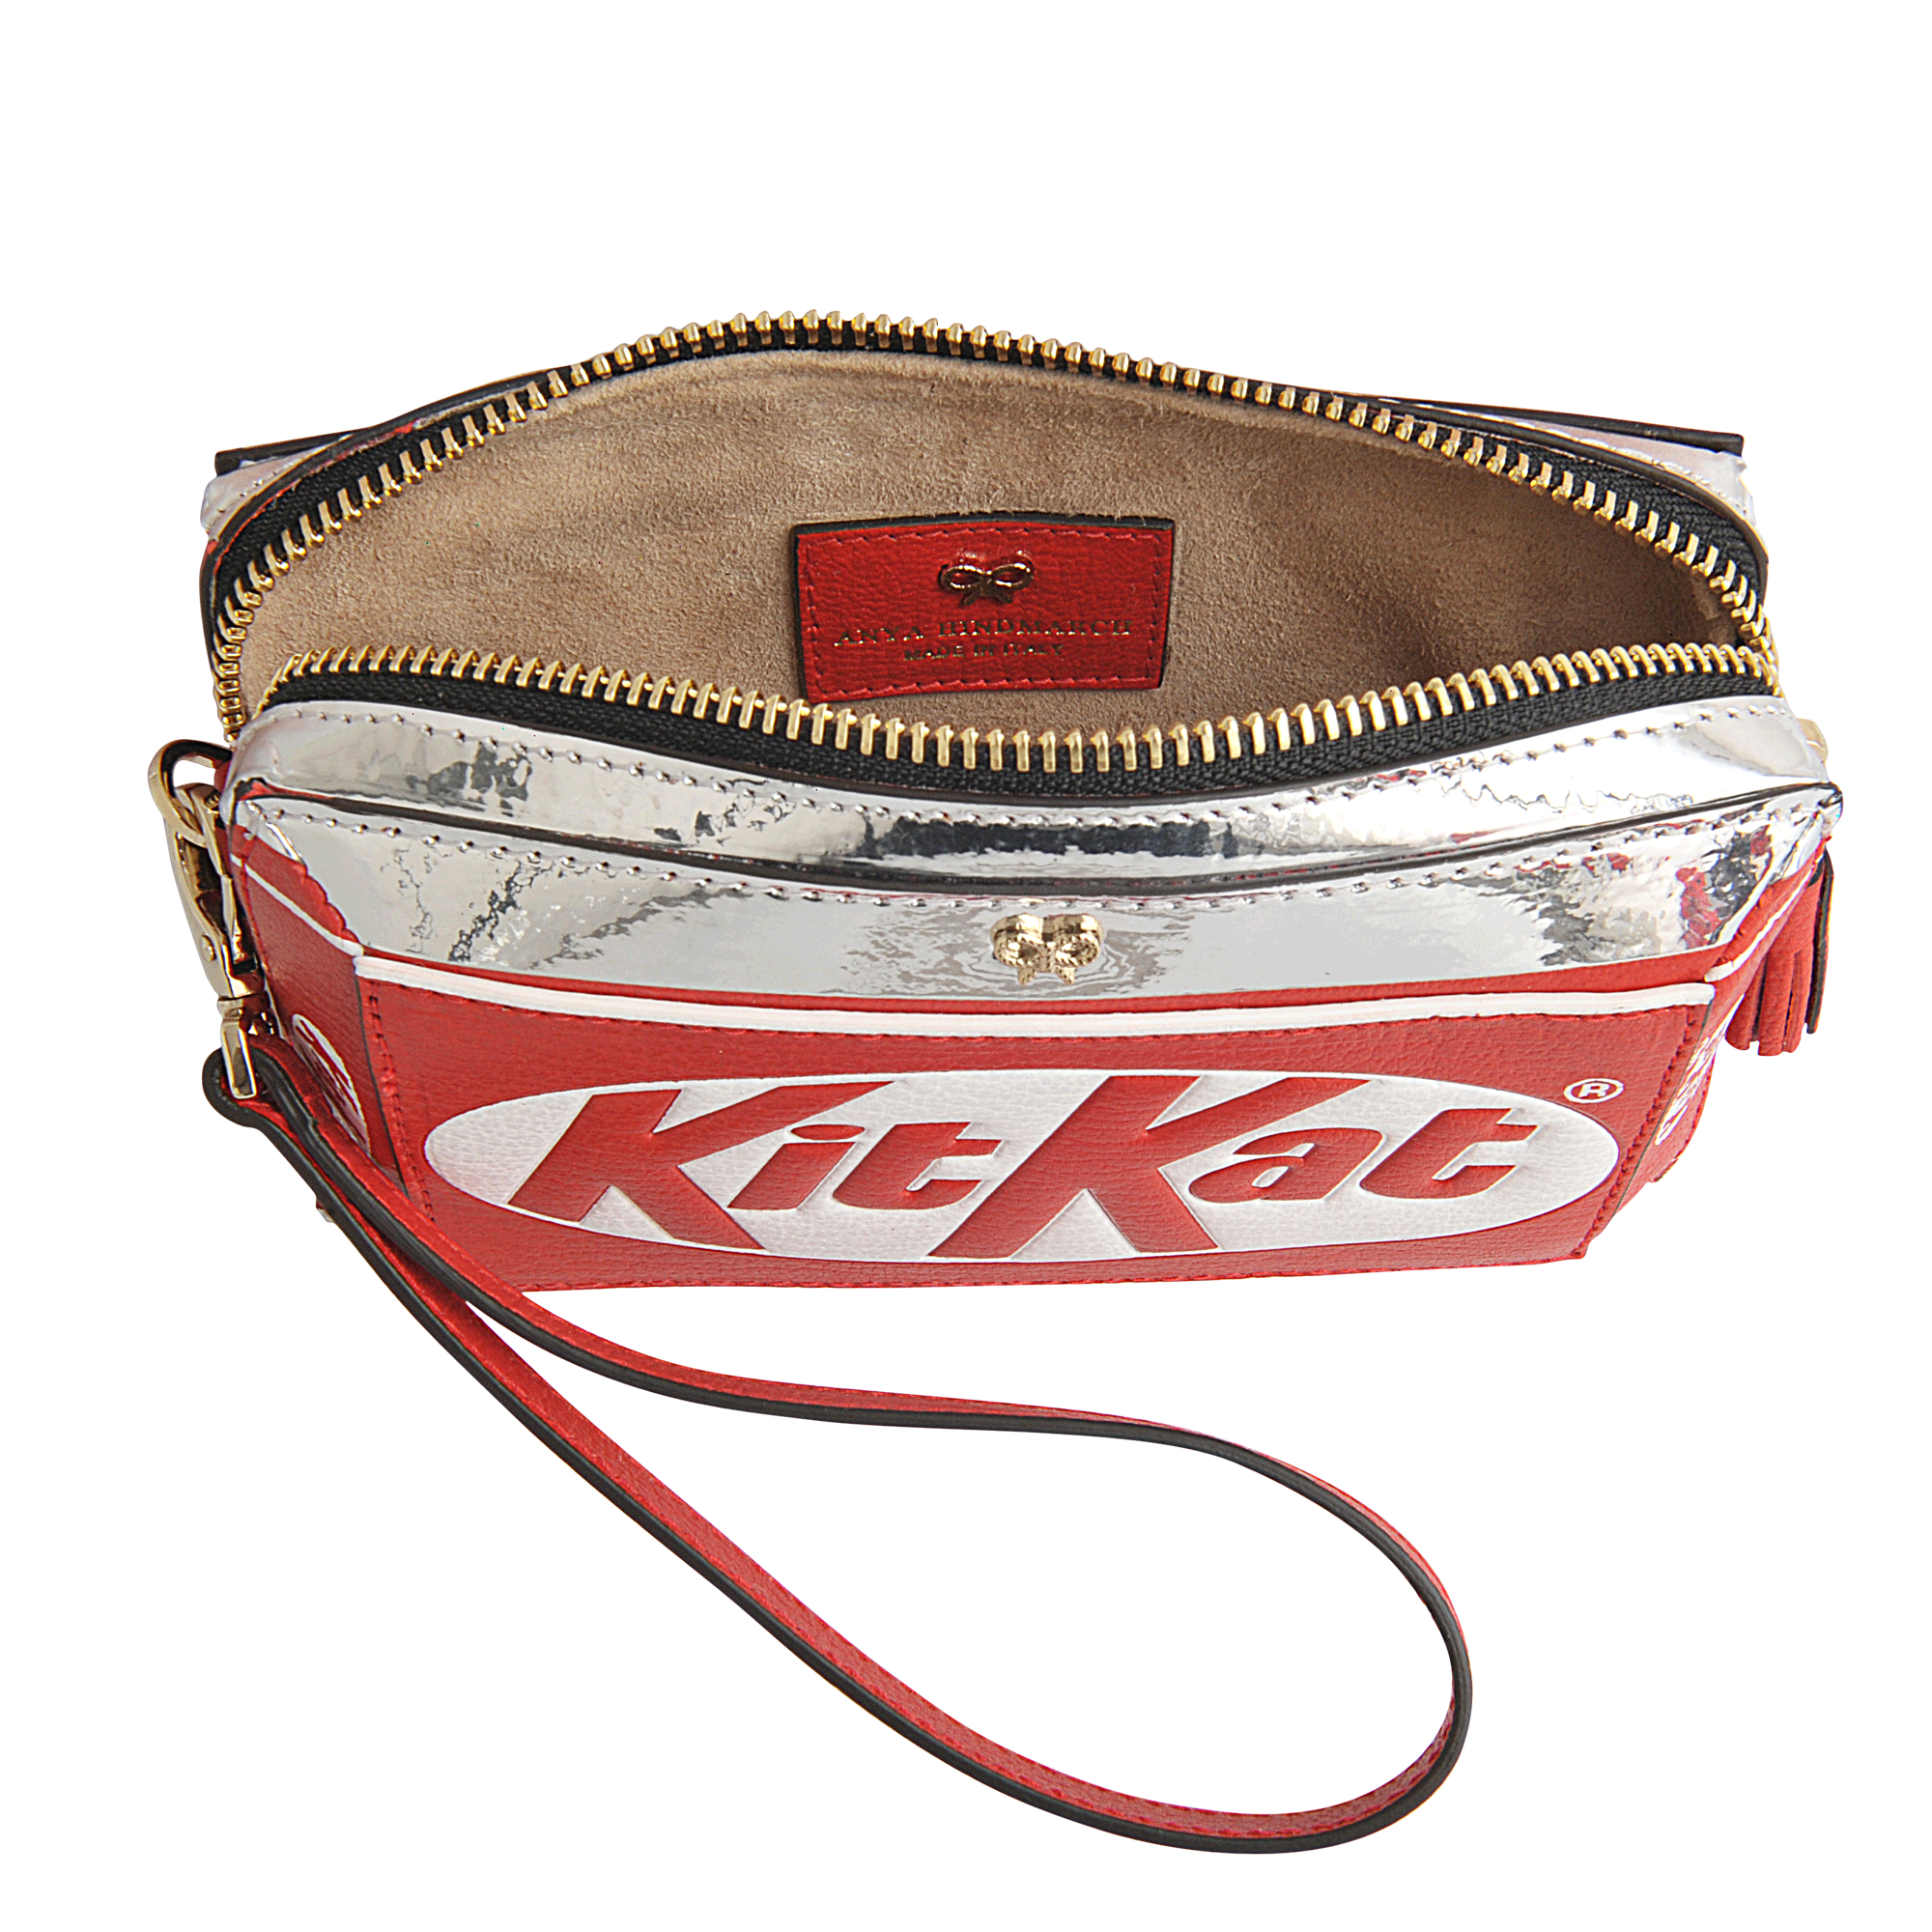 Anya hindmarch Kit-kat Clutch in Red | Lyst